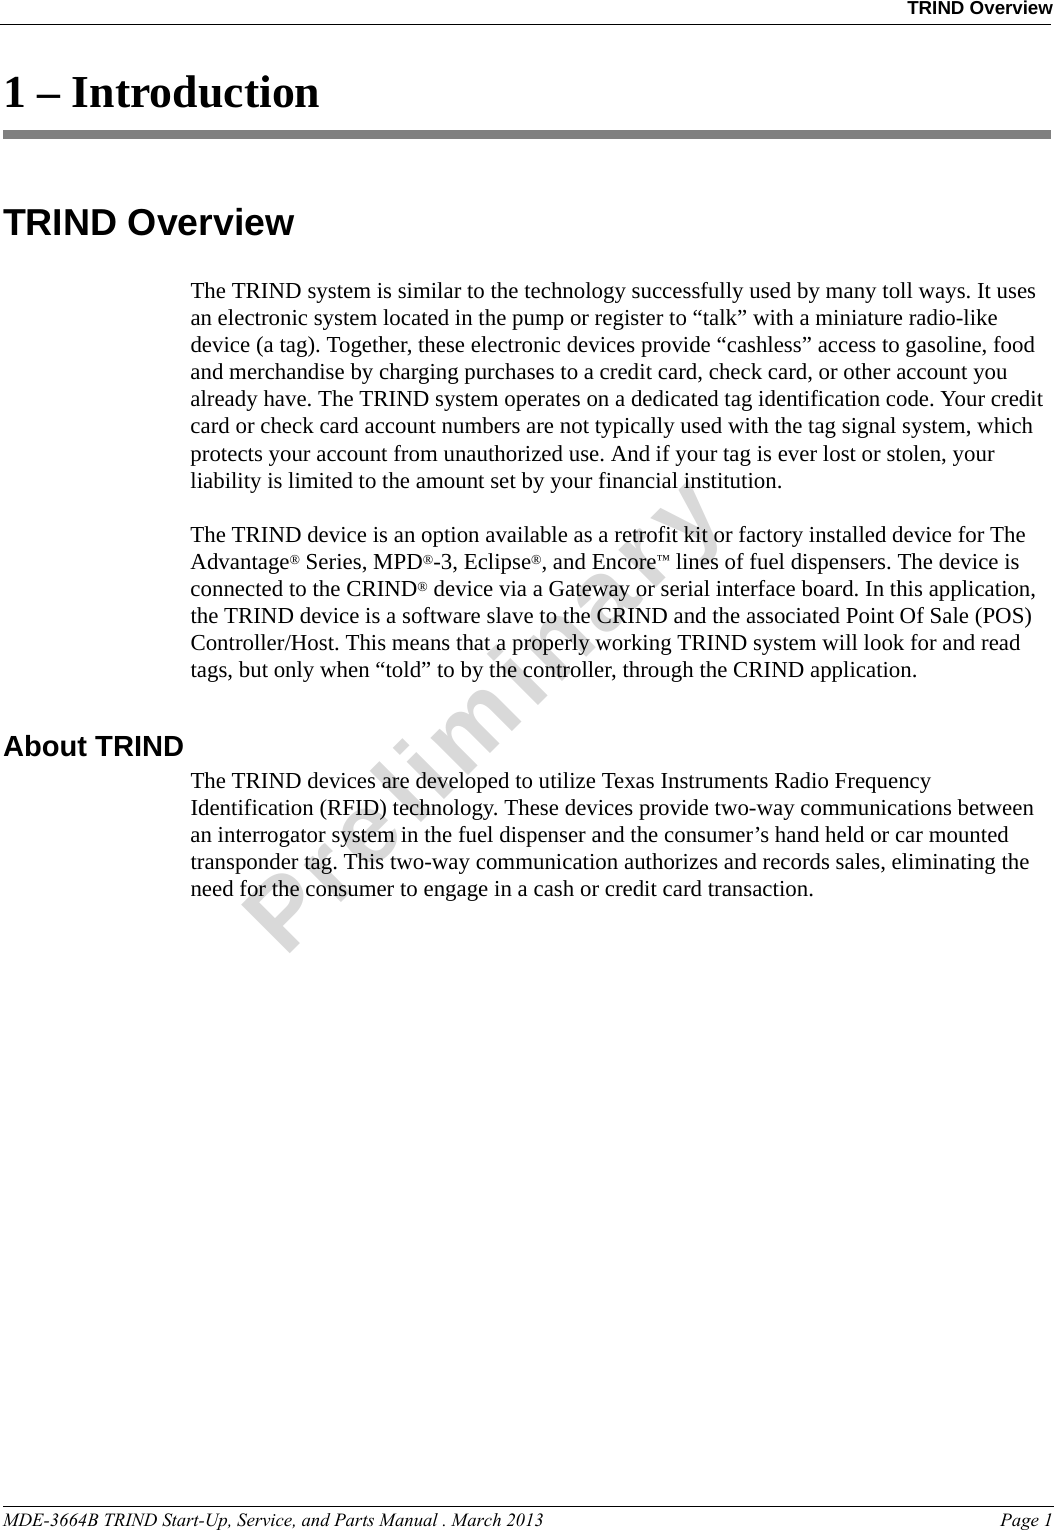 MDE-3664B TRIND Start-Up, Service, and Parts Manual . March 2013 Page 1TRIND OverviewPreliminary1 – IntroductionTRIND OverviewThe TRIND system is similar to the technology successfully used by many toll ways. It uses an electronic system located in the pump or register to “talk” with a miniature radio-like device (a tag). Together, these electronic devices provide “cashless” access to gasoline, food and merchandise by charging purchases to a credit card, check card, or other account you already have. The TRIND system operates on a dedicated tag identification code. Your credit card or check card account numbers are not typically used with the tag signal system, which protects your account from unauthorized use. And if your tag is ever lost or stolen, your liability is limited to the amount set by your financial institution. The TRIND device is an option available as a retrofit kit or factory installed device for The Advantage® Series, MPD®-3, Eclipse®, and Encore™ lines of fuel dispensers. The device is connected to the CRIND® device via a Gateway or serial interface board. In this application, the TRIND device is a software slave to the CRIND and the associated Point Of Sale (POS) Controller/Host. This means that a properly working TRIND system will look for and read tags, but only when “told” to by the controller, through the CRIND application. About TRIND The TRIND devices are developed to utilize Texas Instruments Radio Frequency Identification (RFID) technology. These devices provide two-way communications between an interrogator system in the fuel dispenser and the consumer’s hand held or car mounted transponder tag. This two-way communication authorizes and records sales, eliminating the need for the consumer to engage in a cash or credit card transaction.